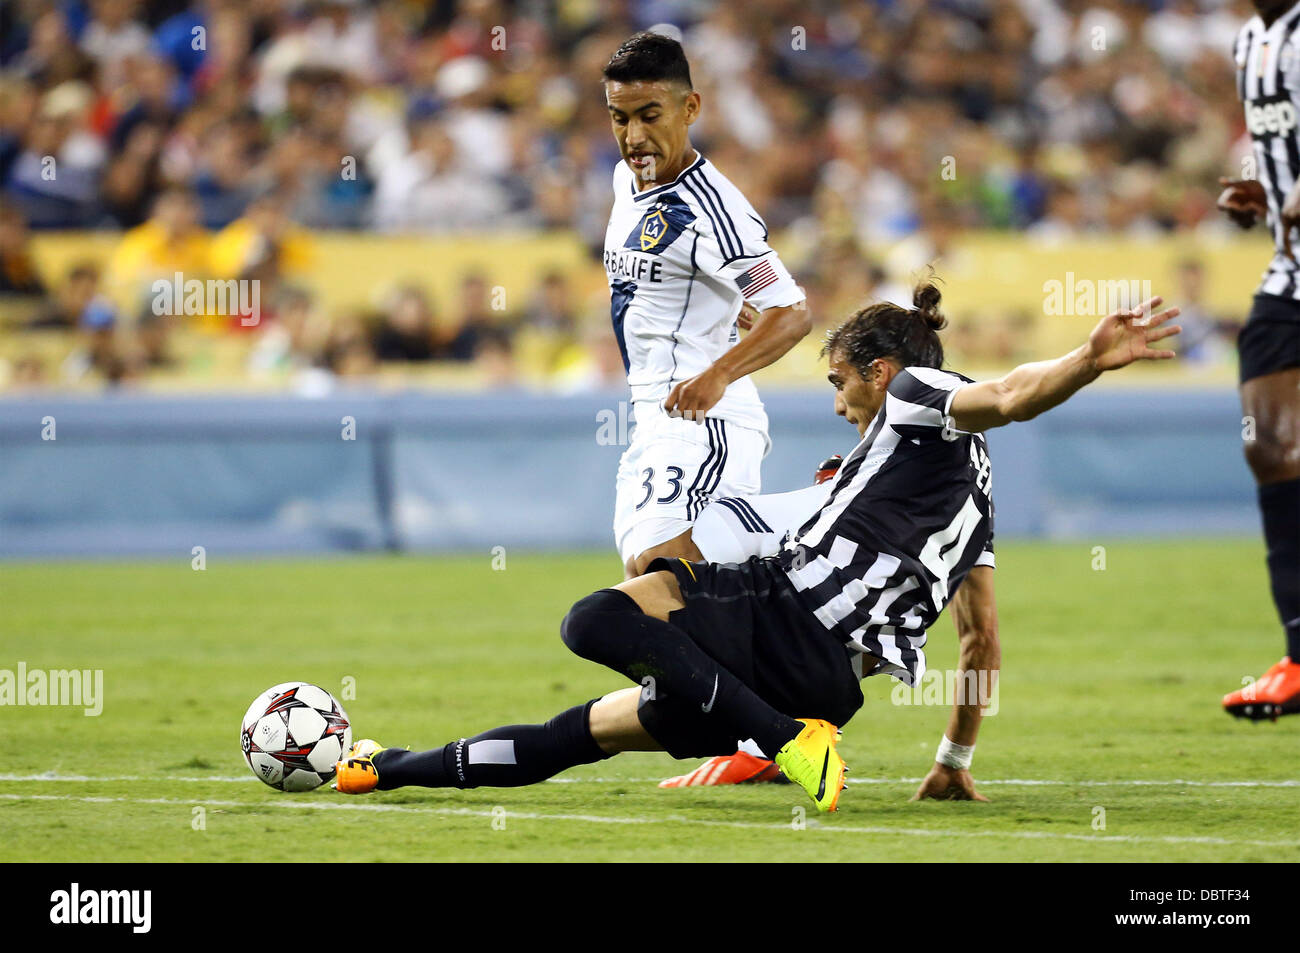 Los Angeles, California, USA. 3rd Aug, 2013. August 3, 2013 Los Angeles, California: Juventus defender Martin Caceres (4) moves the ball in action during Match 6 of the Guinness International Champions Cup Soccer game between Juventus and LA Galaxy at Dodger Stadium on August 3, 2013 in Los Angeles, California. Rob Carmell/CSM/Alamy Live News Stock Photo